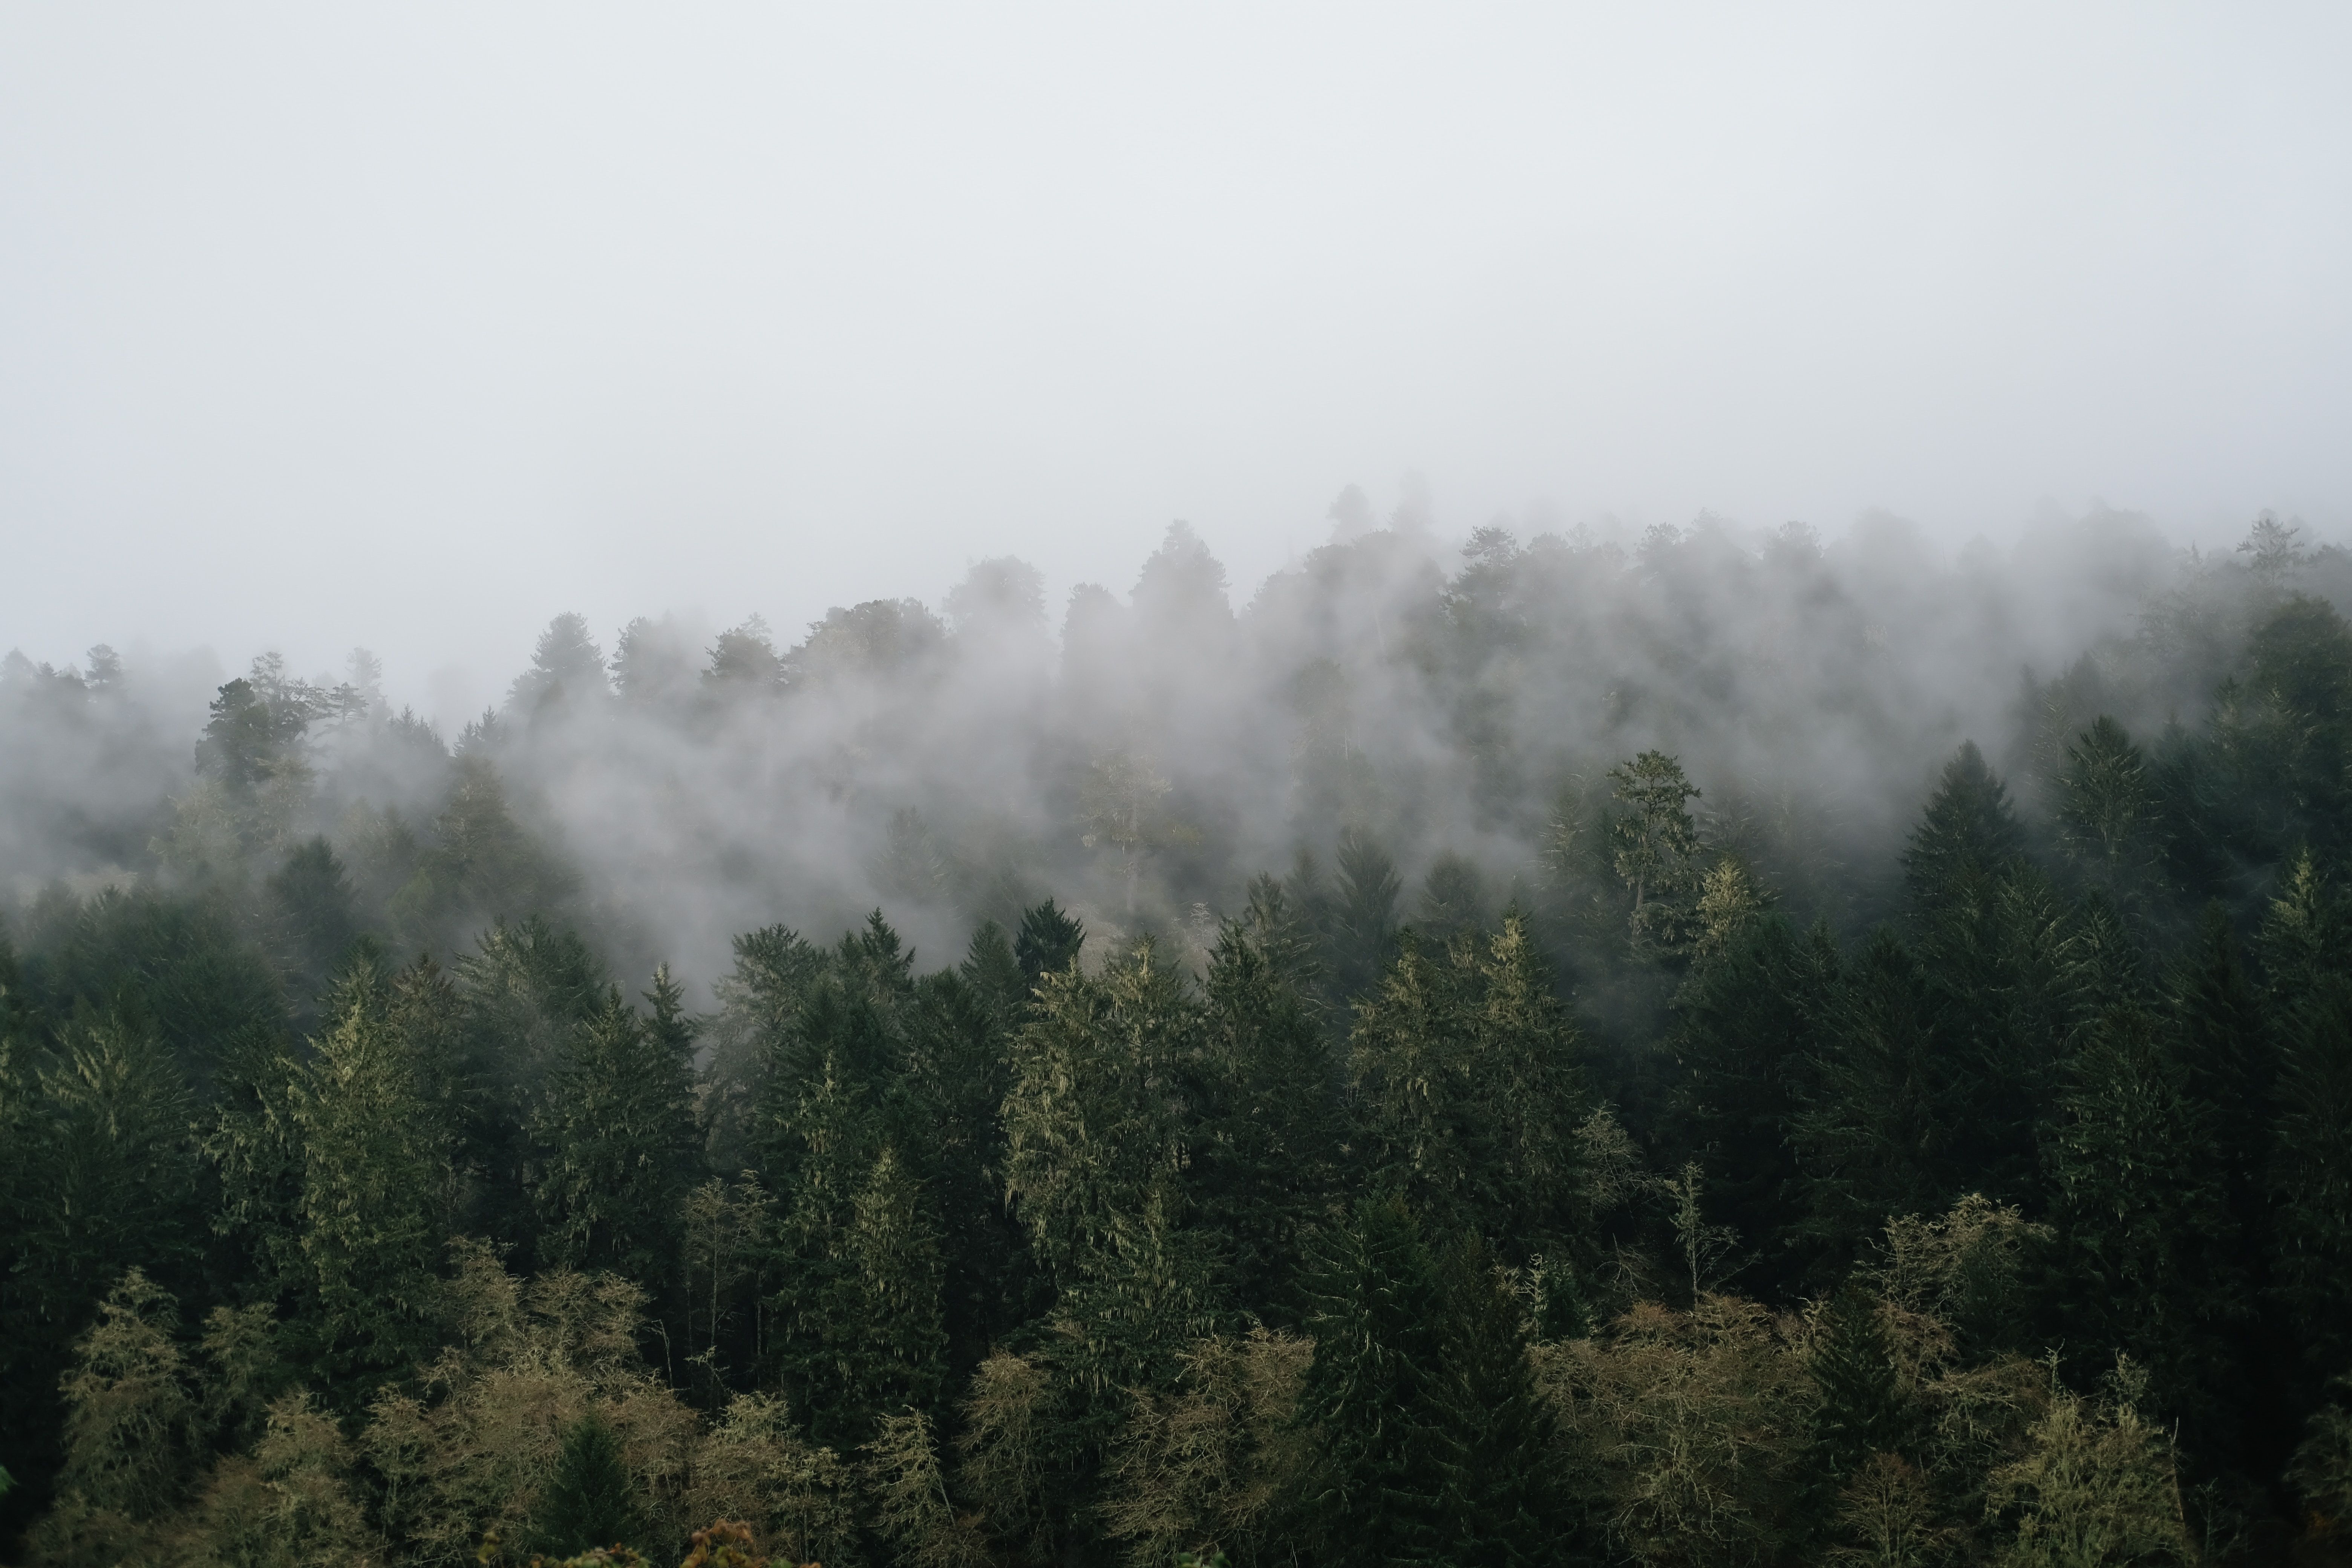 A foggy forest full of trees in the Klamath Mountains in California, USA